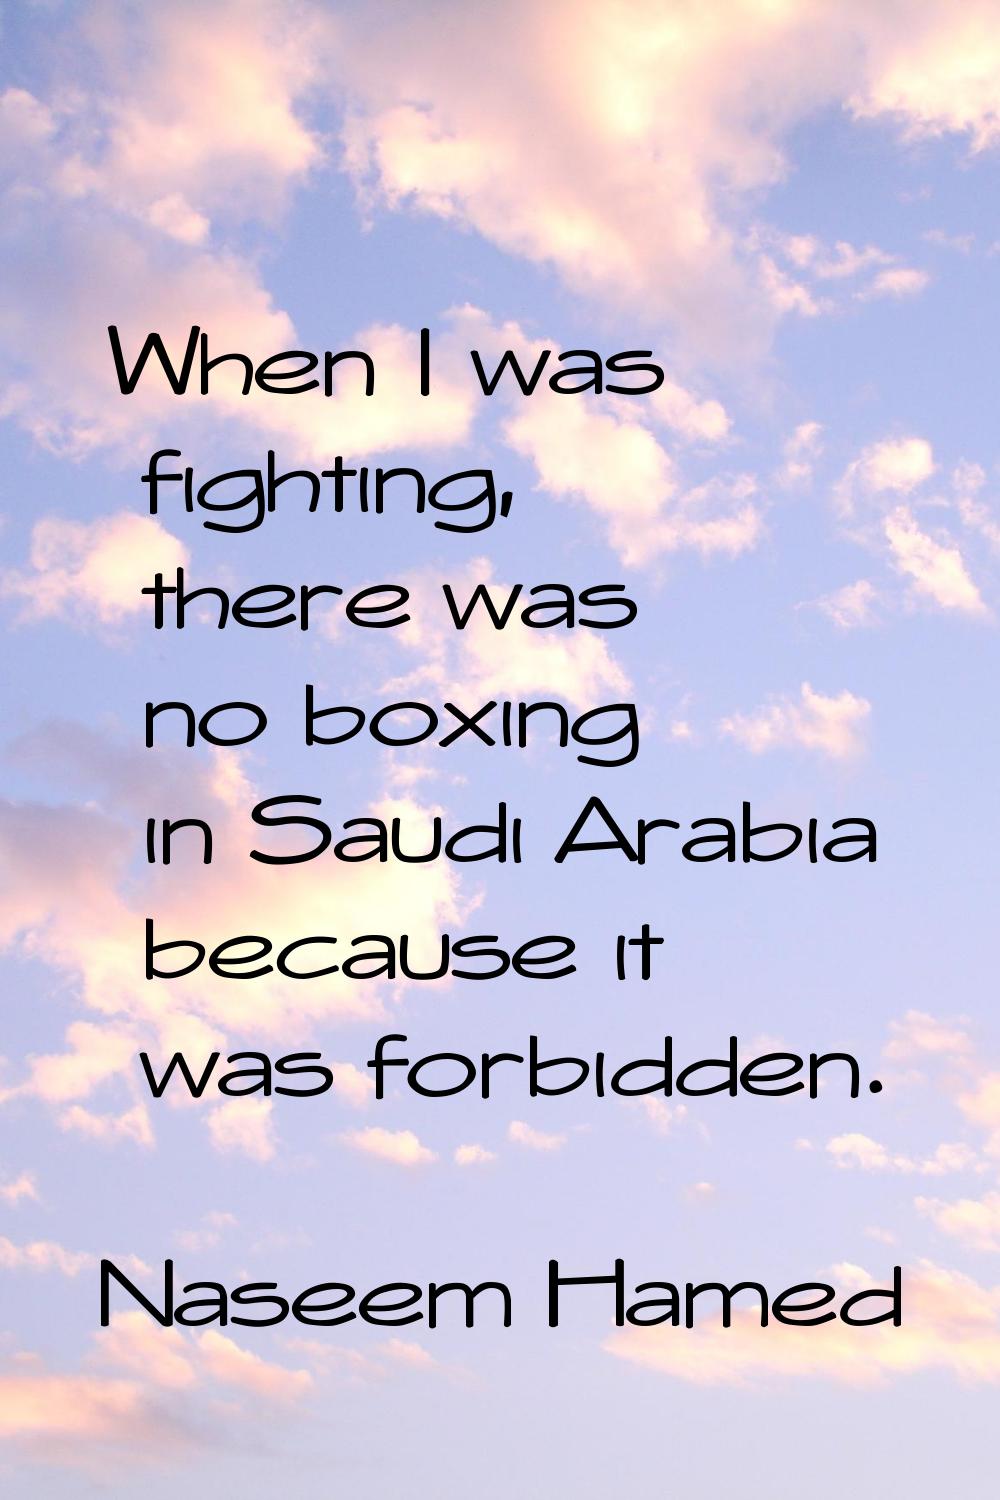 When I was fighting, there was no boxing in Saudi Arabia because it was forbidden.